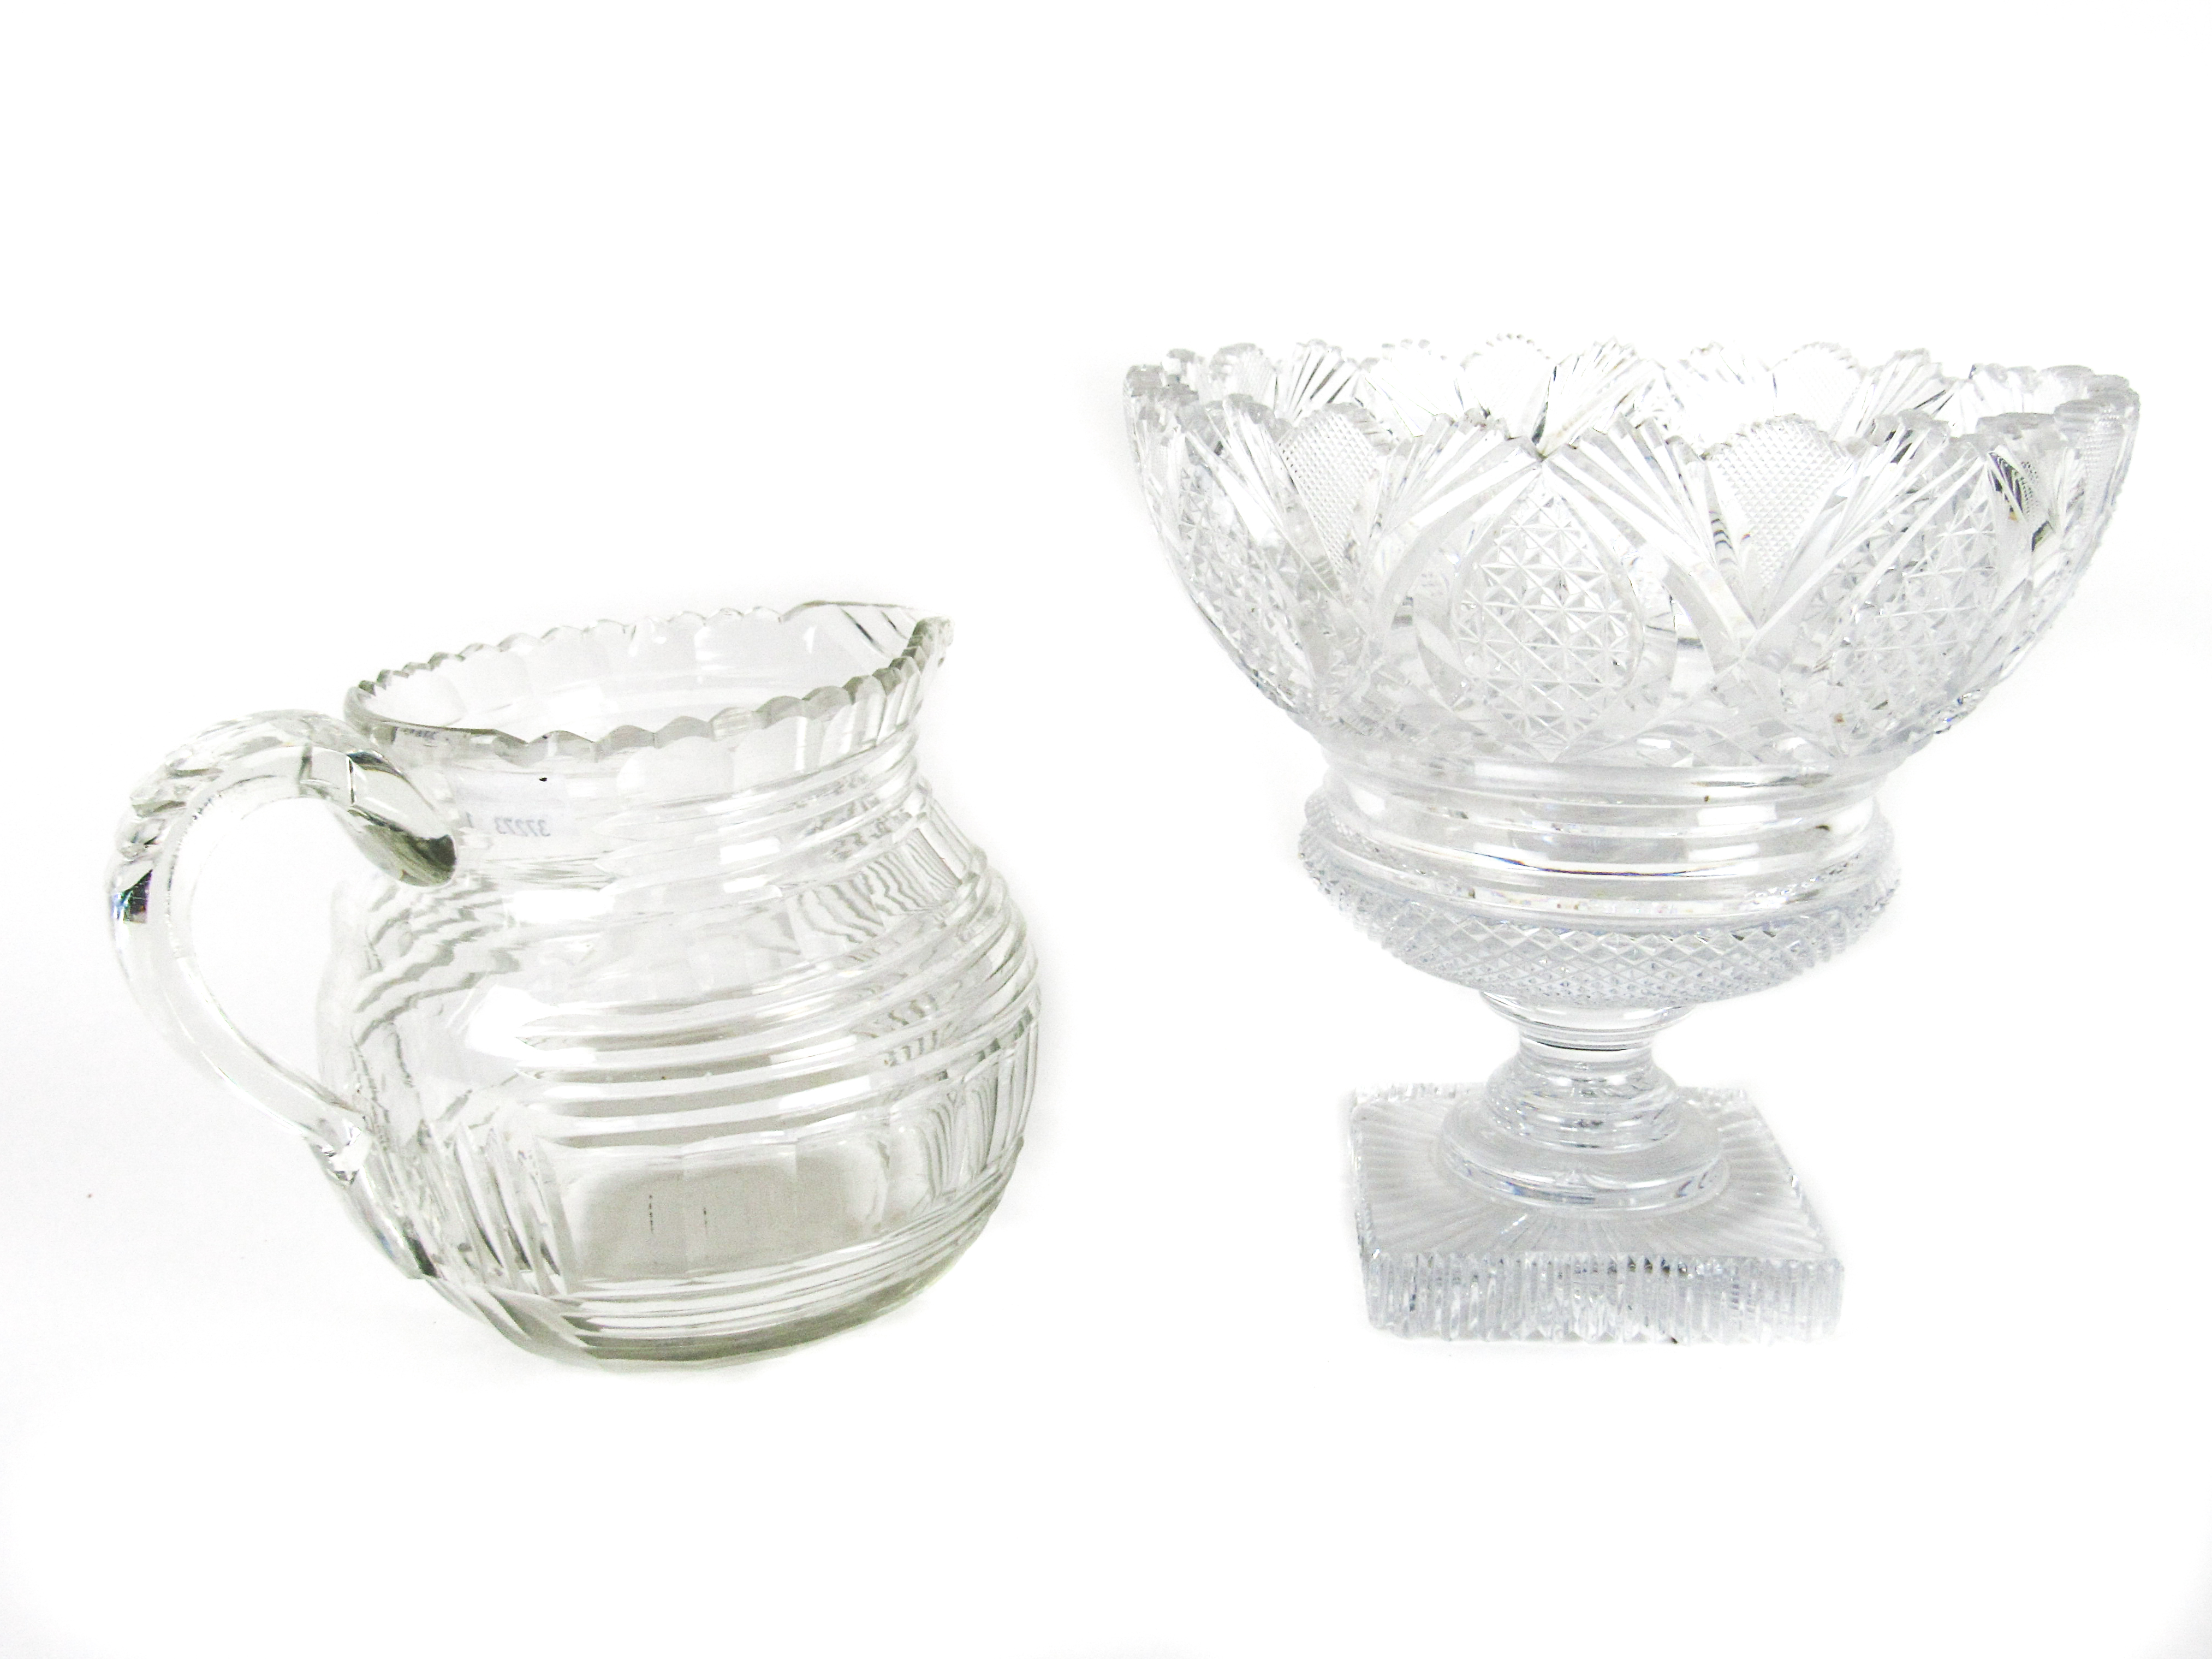 A 19th Century Irish Waterford crystal Water Jug, with multi-pointed rim, narrow spout, shaped